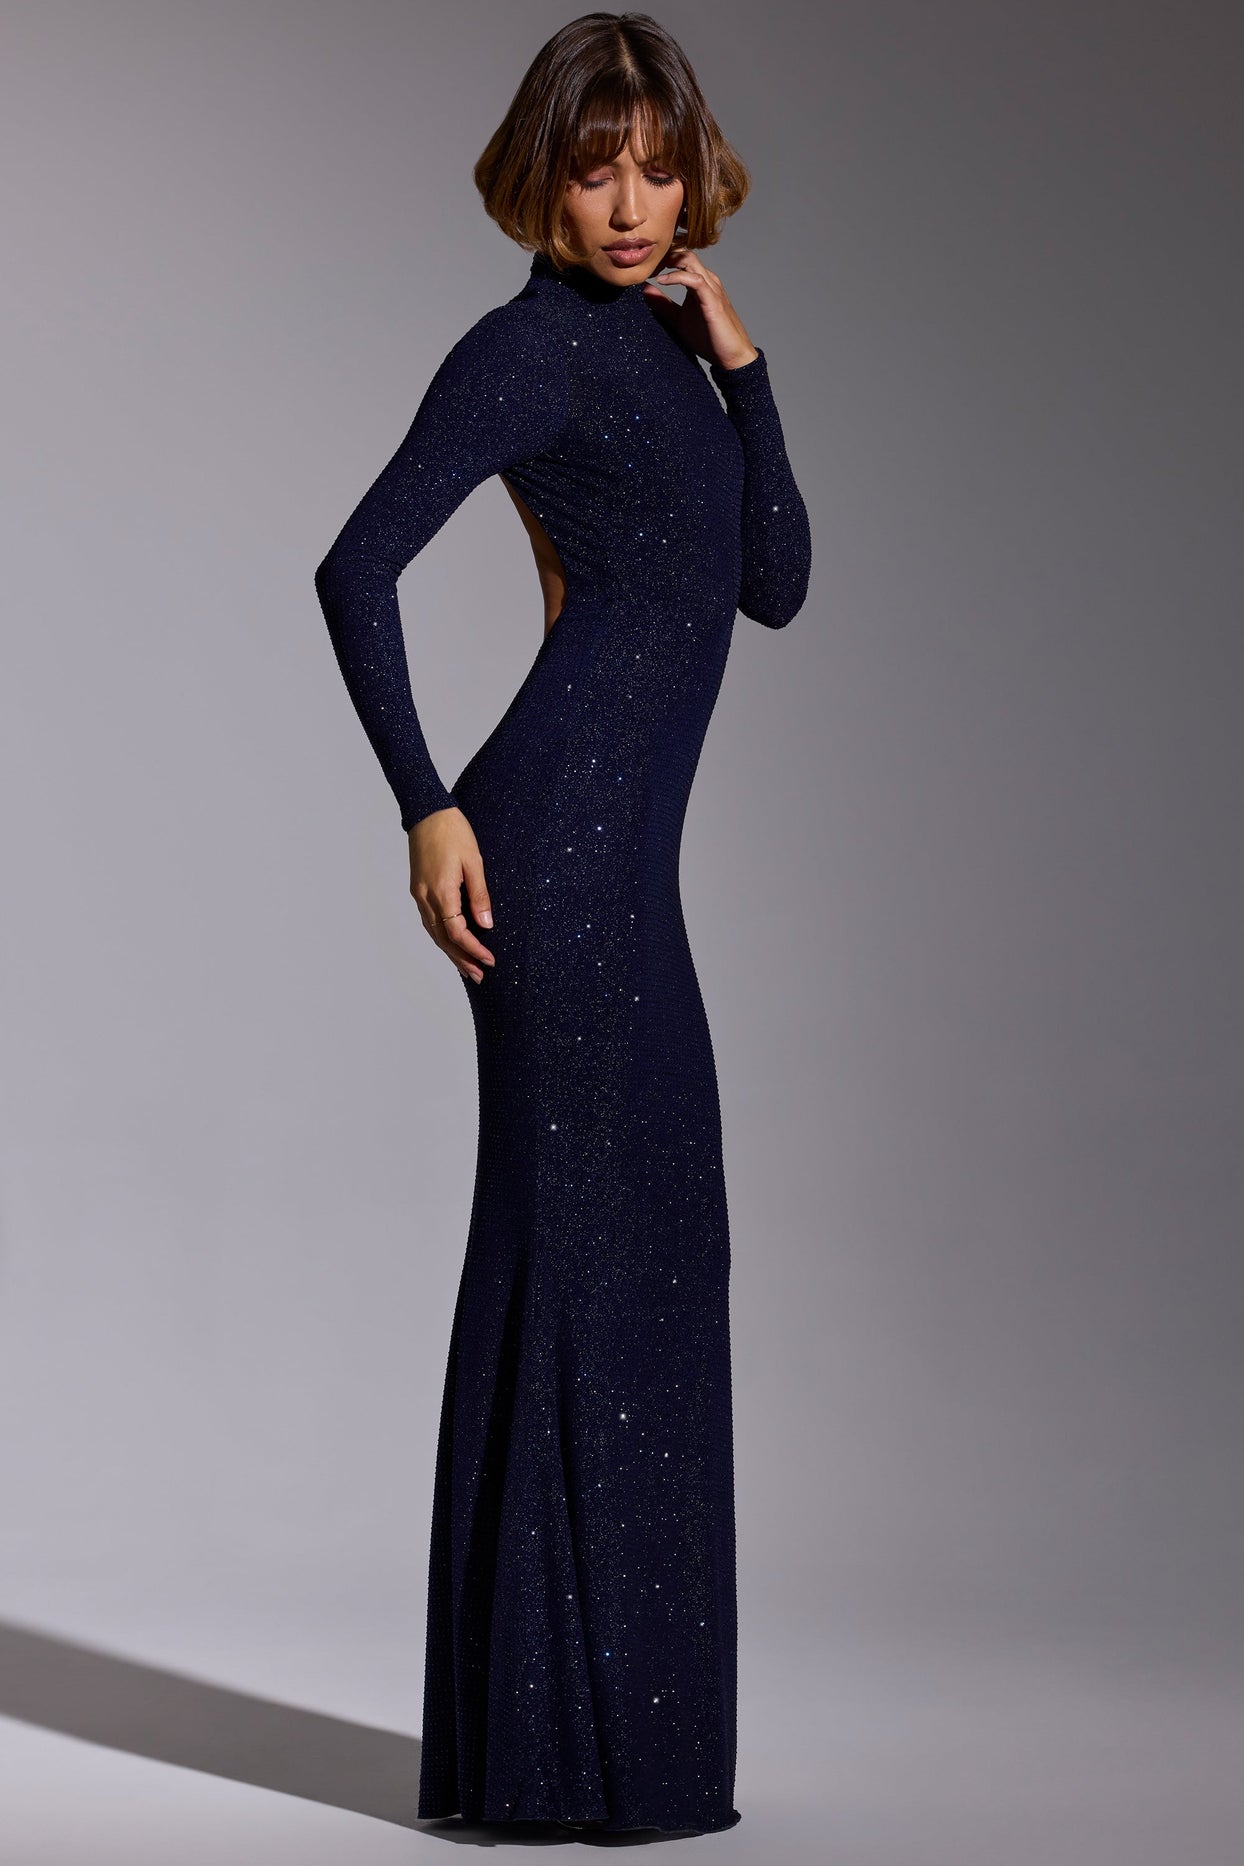 Embellished Long Sleeve Evening Gown in Royal Indigo